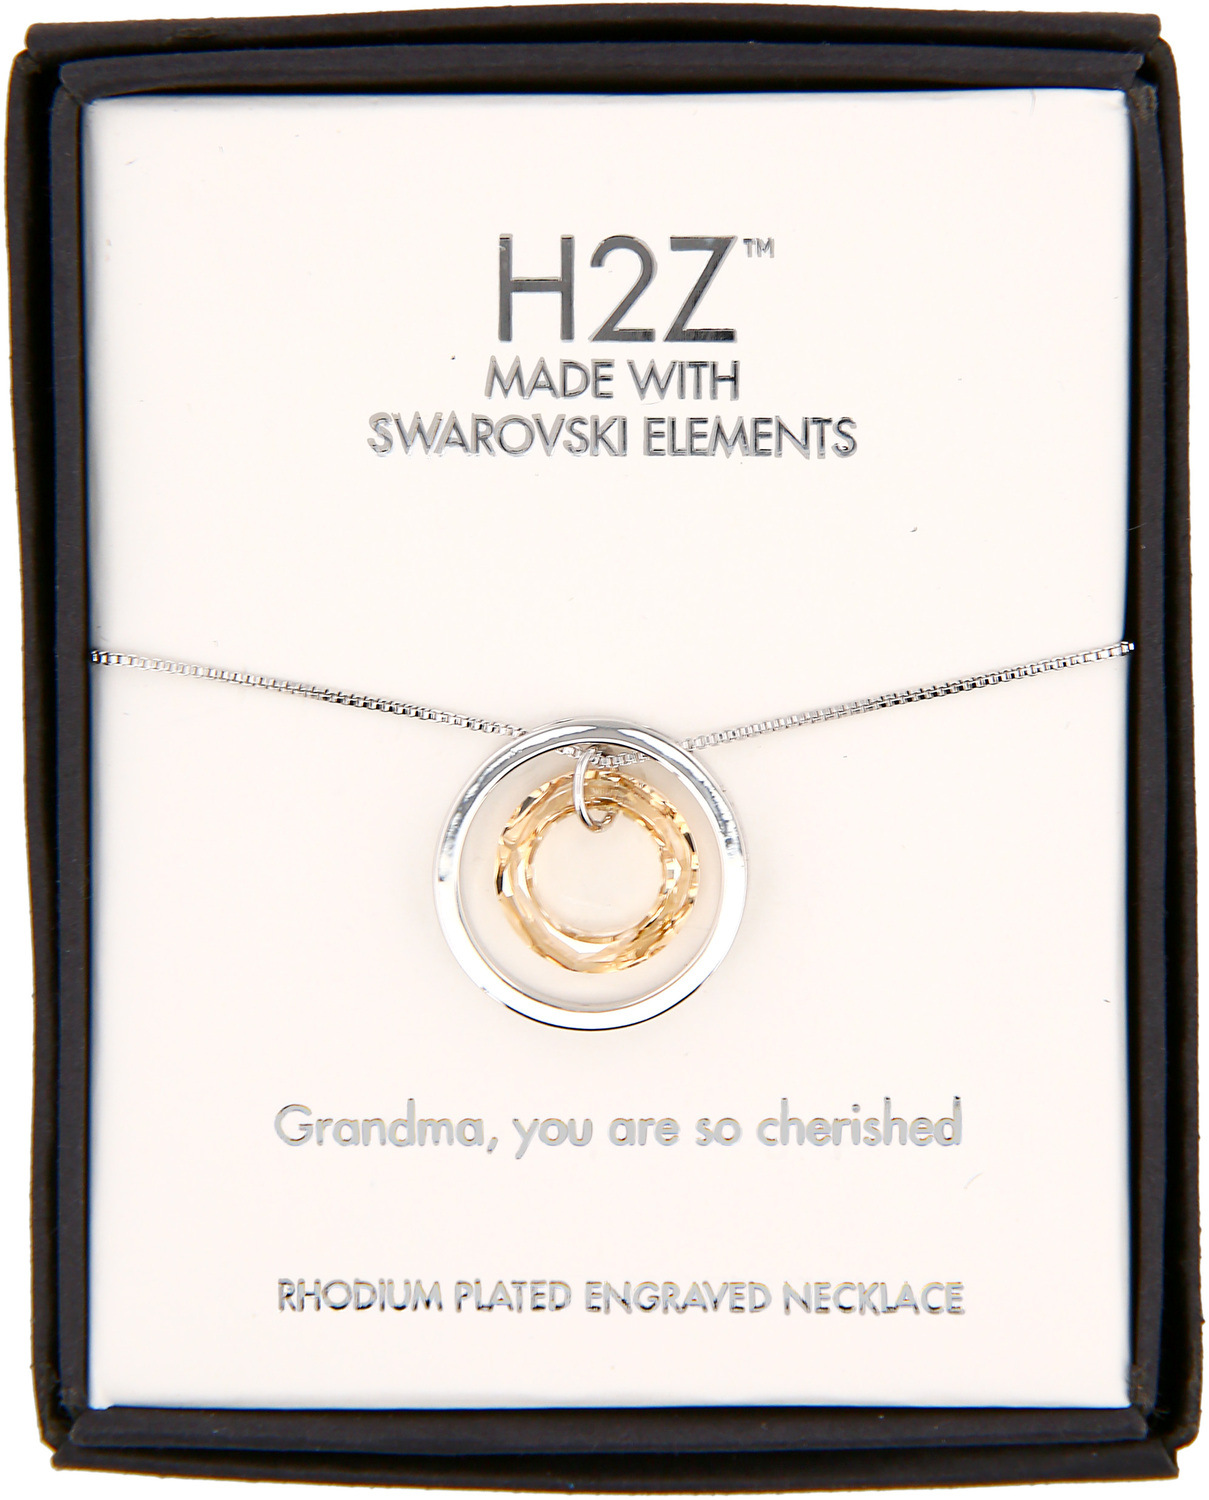 Grandma
Golden Shadow Crystal by H2Z Made with Swarovski Elements - Grandma
Golden Shadow Crystal - 17"-19" Engraved Rhodium Plated Austrian Element Necklace